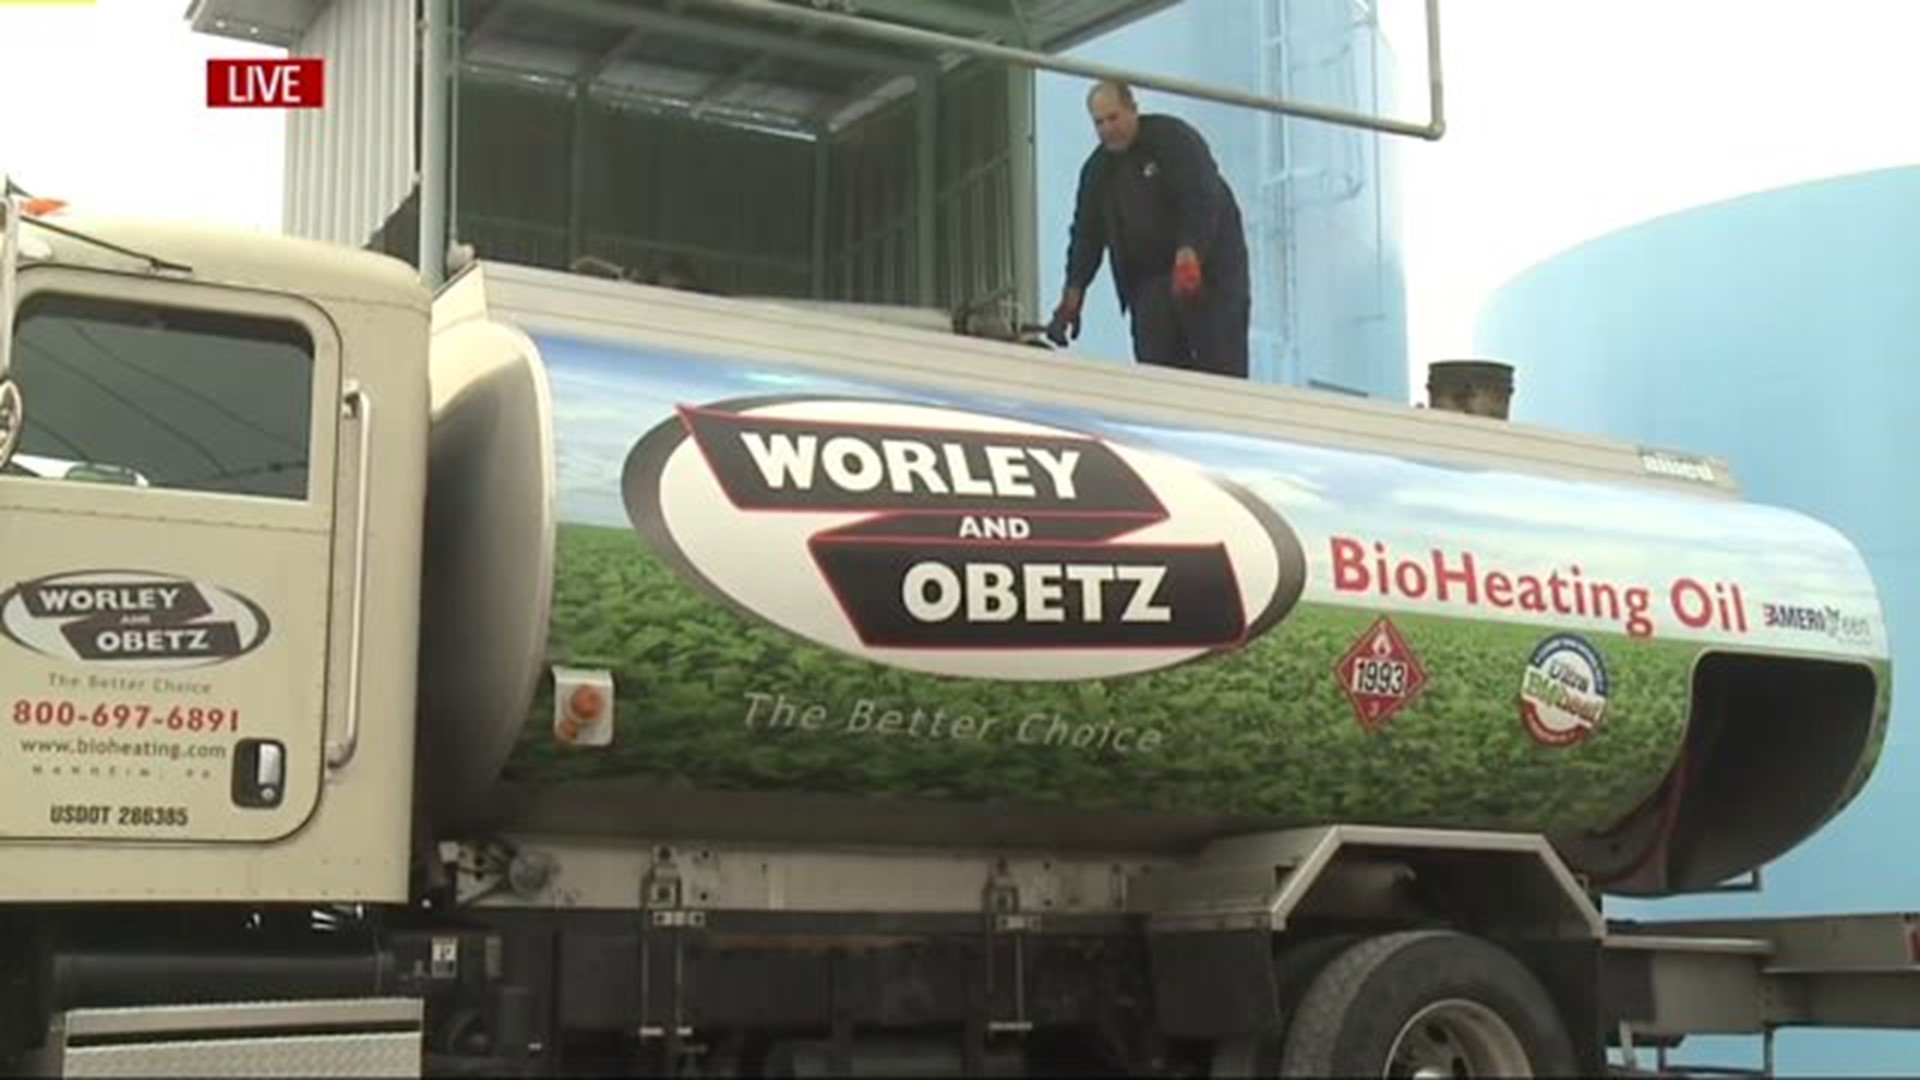 What puts the "bio" in biodiesel